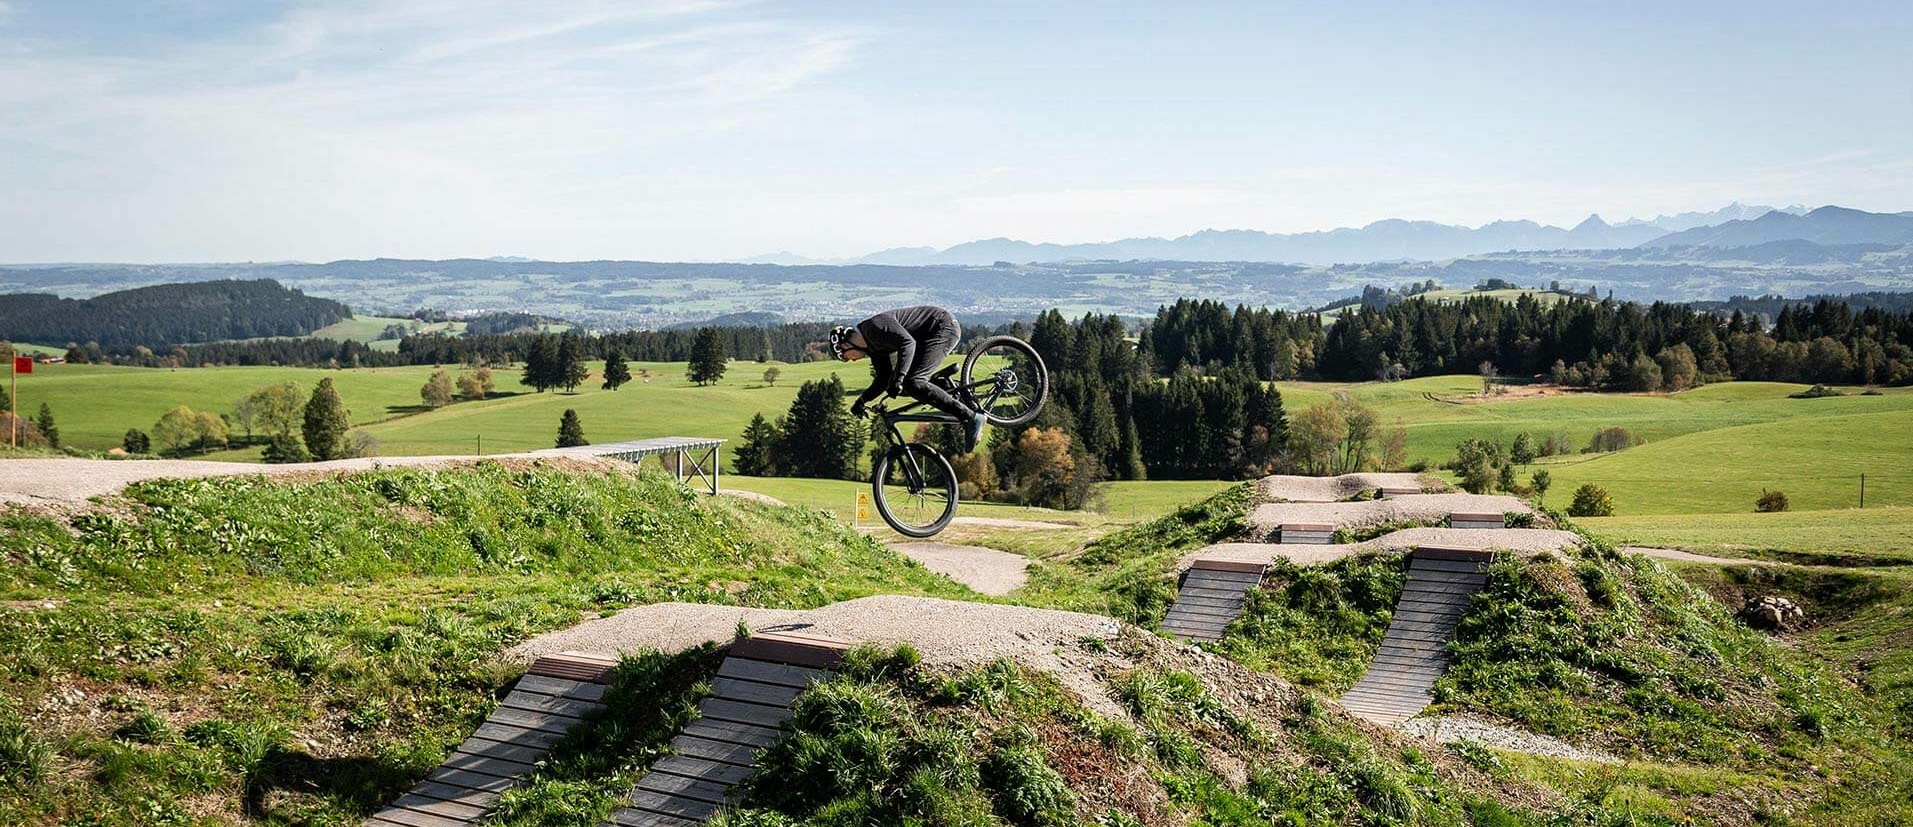 Mountain biker jumps in front of Panorama mountain